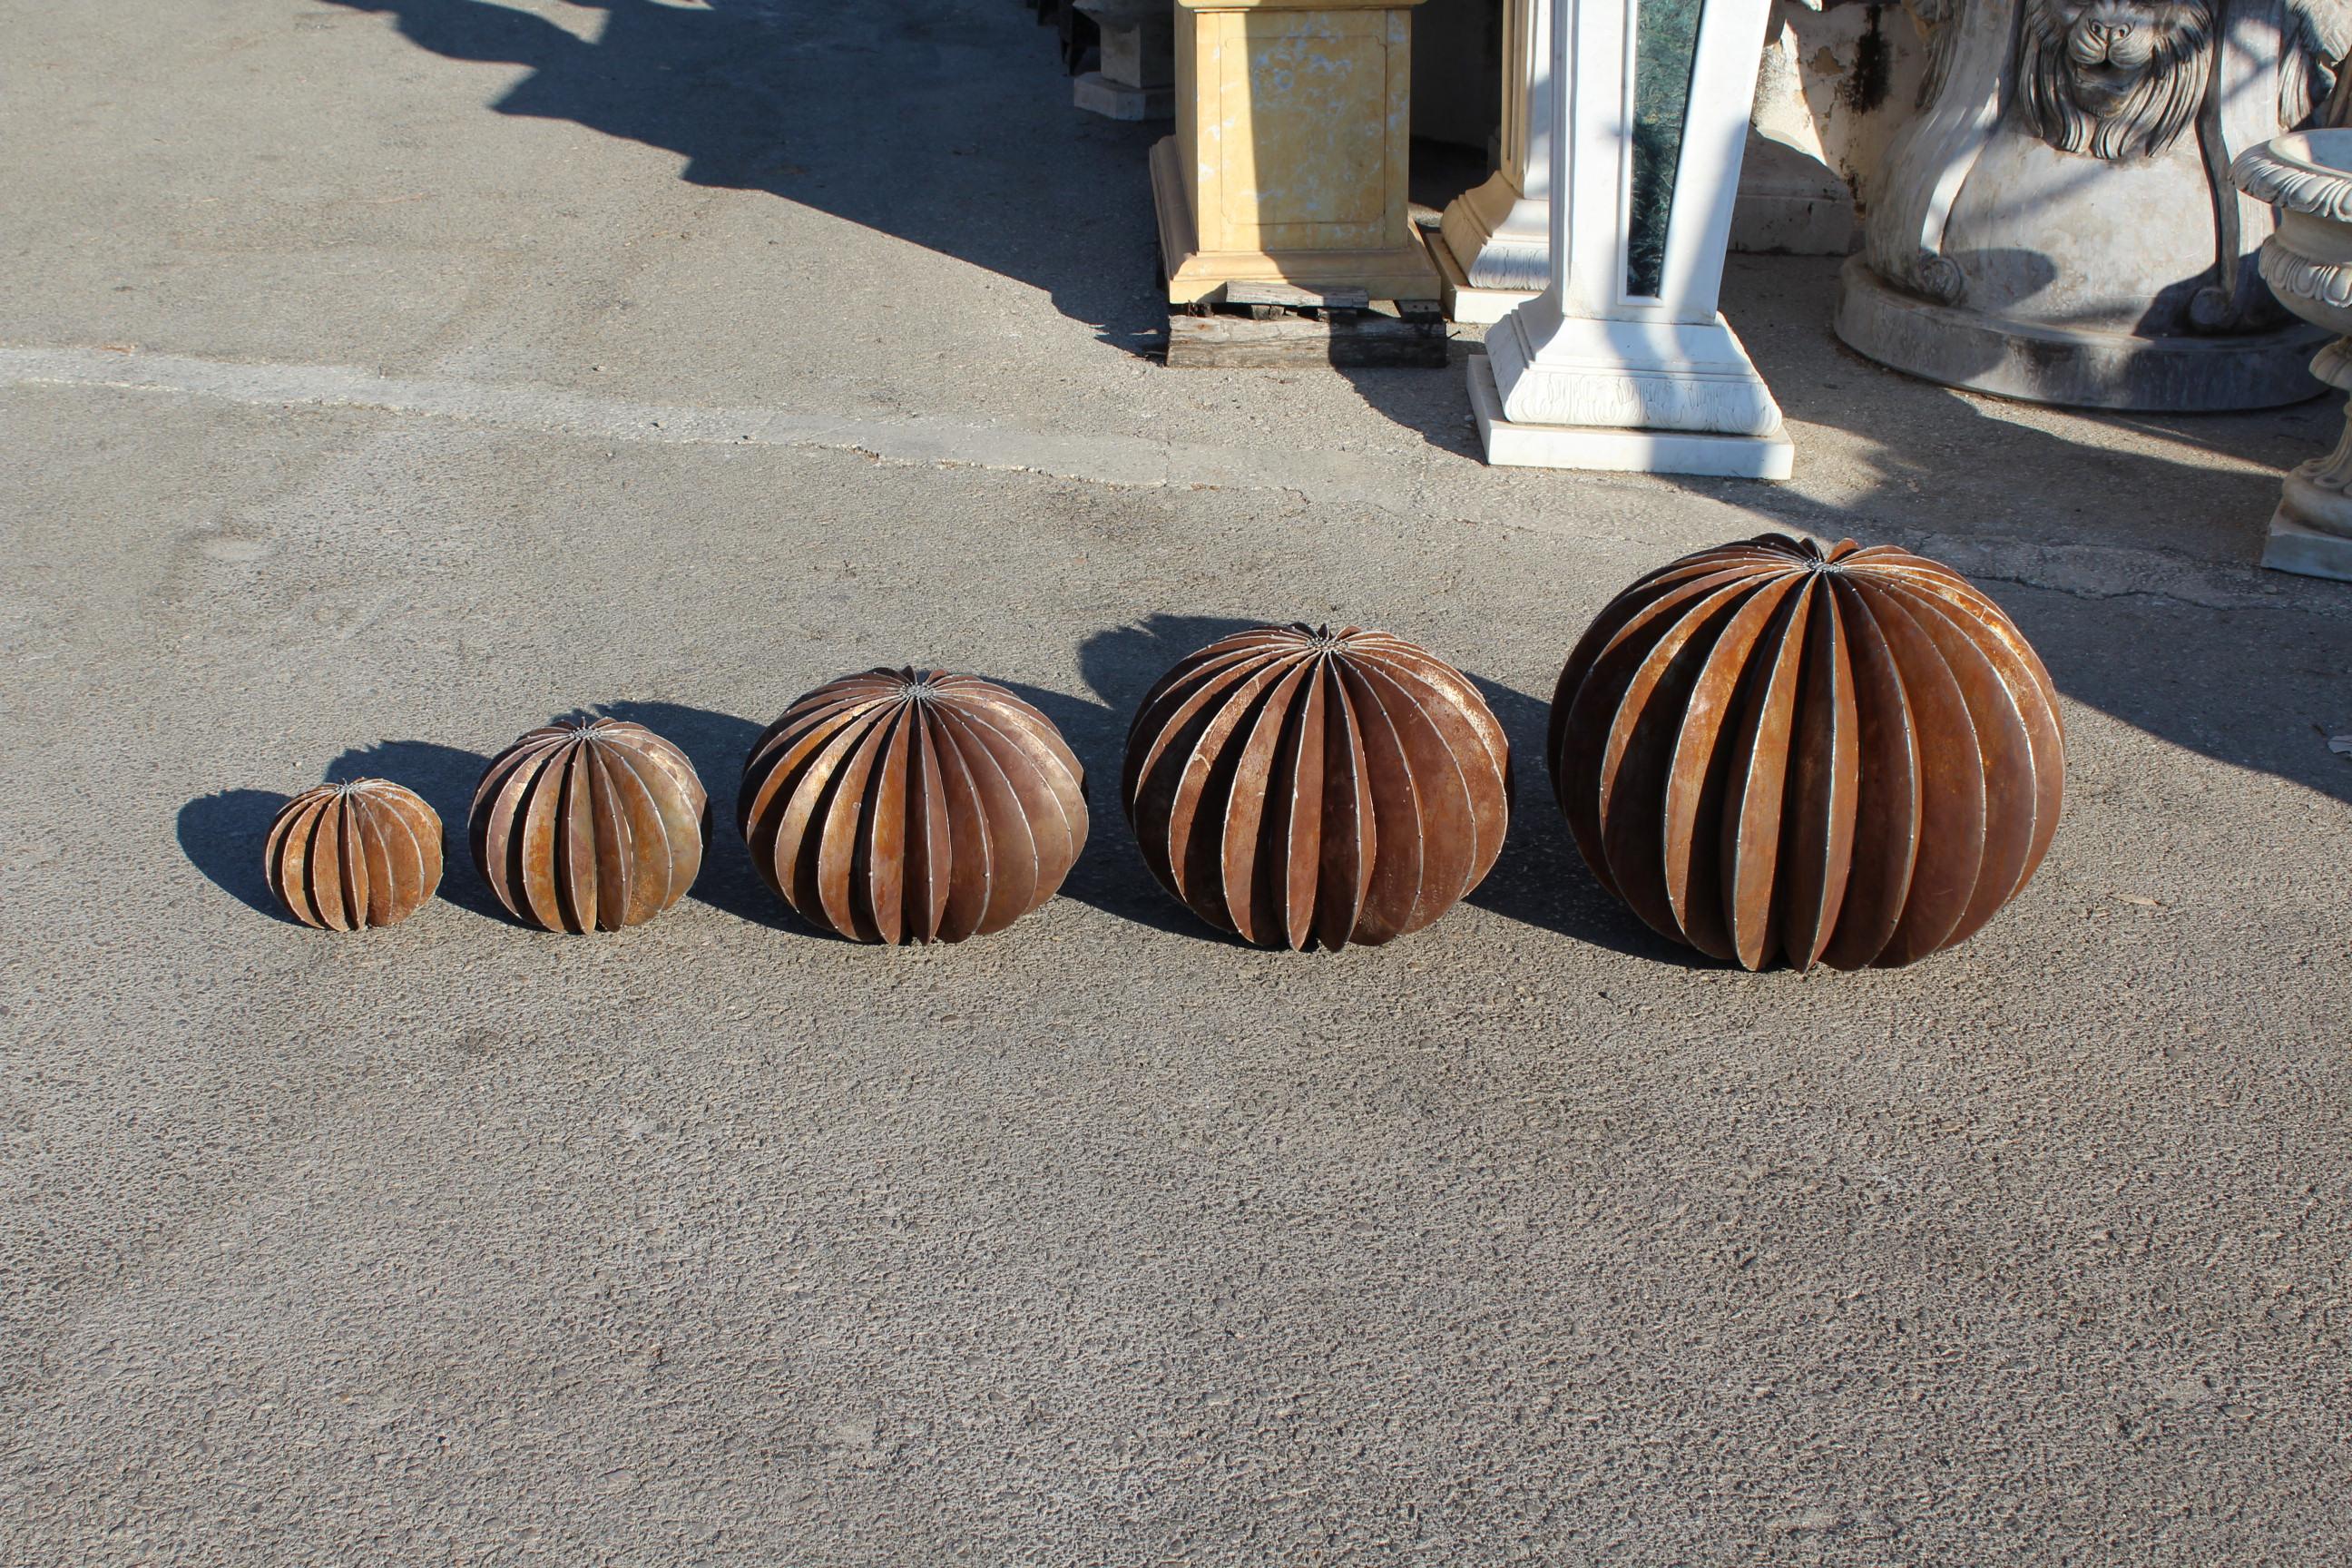 Set of iron ball cactus sculptures in different size.

Sizes:
43 x 55 x 55
32 x 40 x 40
25 x 35 x 35
20 x 25 x 25
15 x 18 x 18.